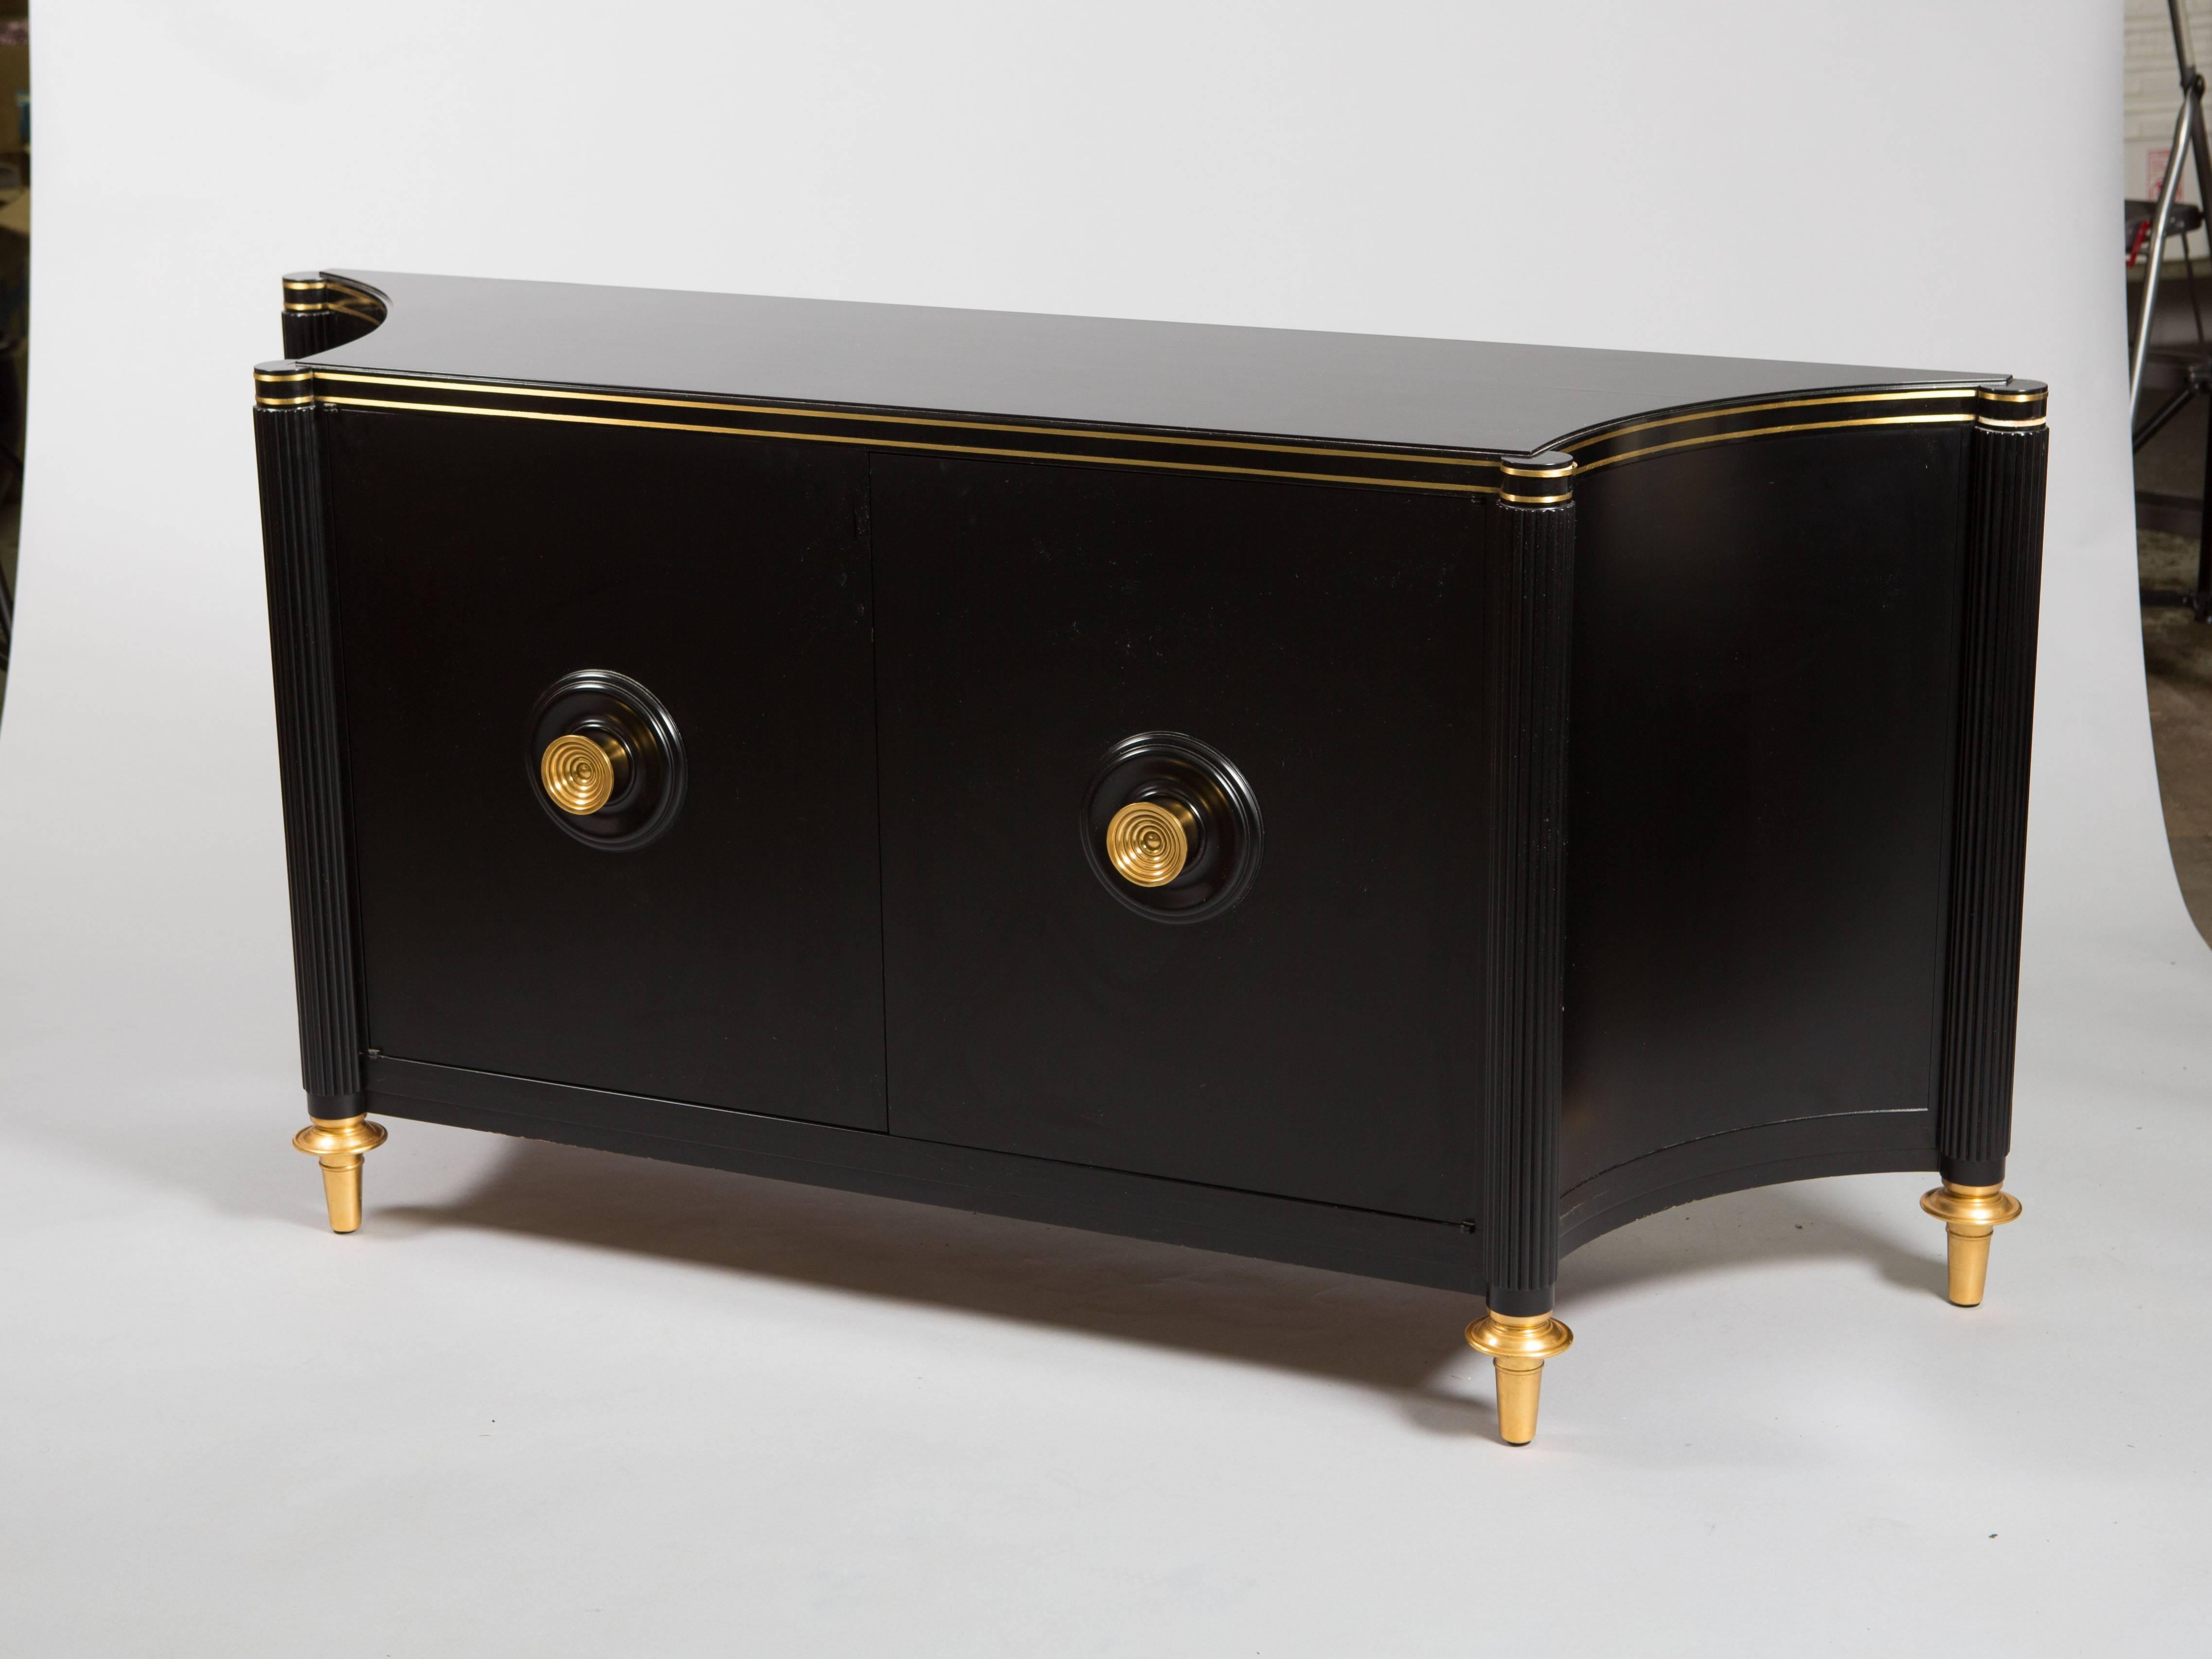 Tommi Parzinger black lacquered sideboard with brass knobs and edge details and brass tapered feet. Custom fabric panel made for each shelf.